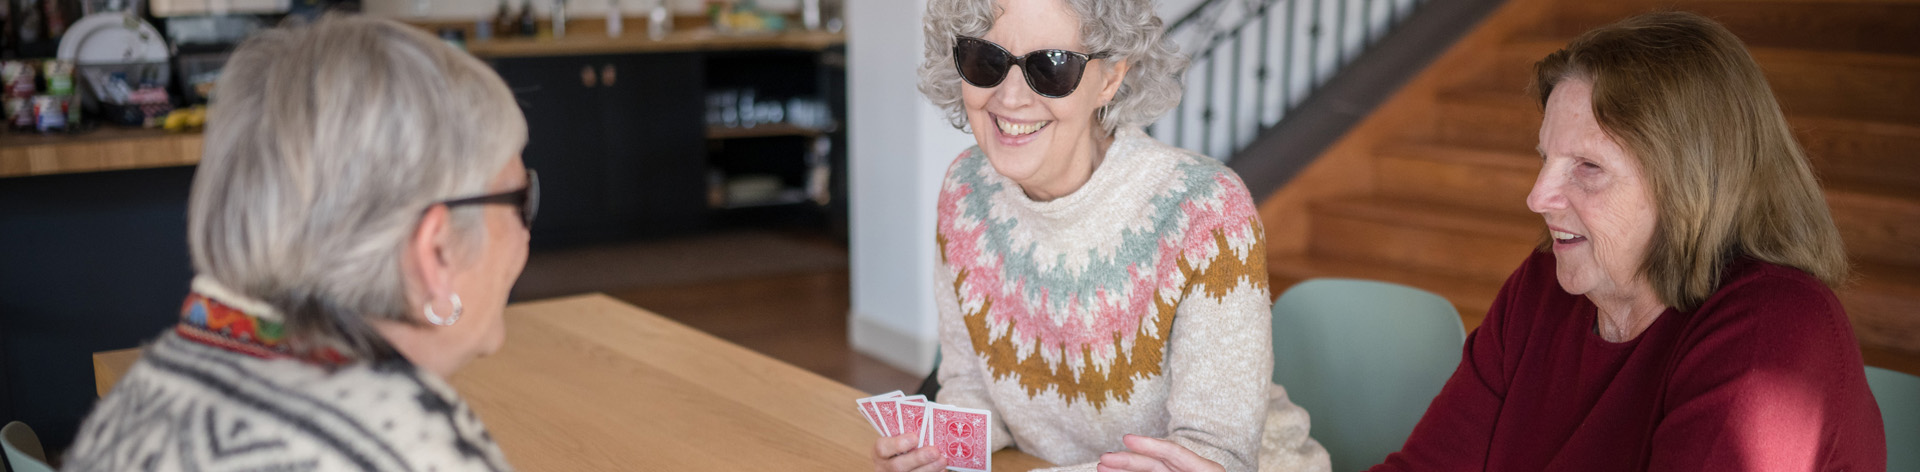 Three senior women smile and play cards together.